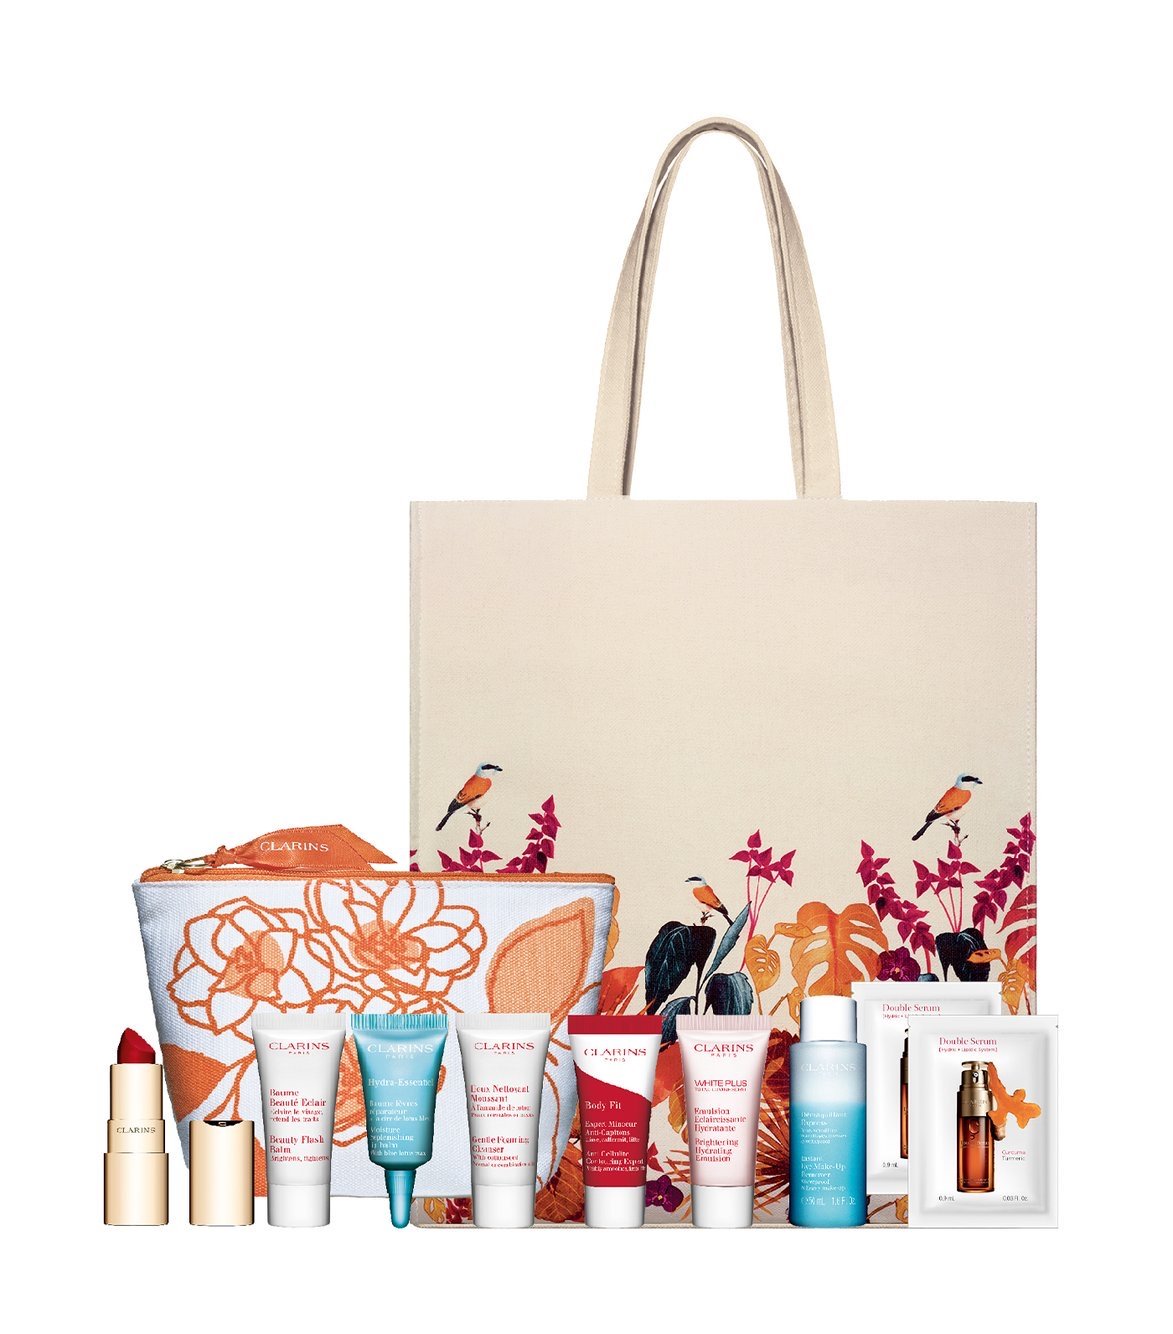 Free Tote Bag and Essential Skin Care Set